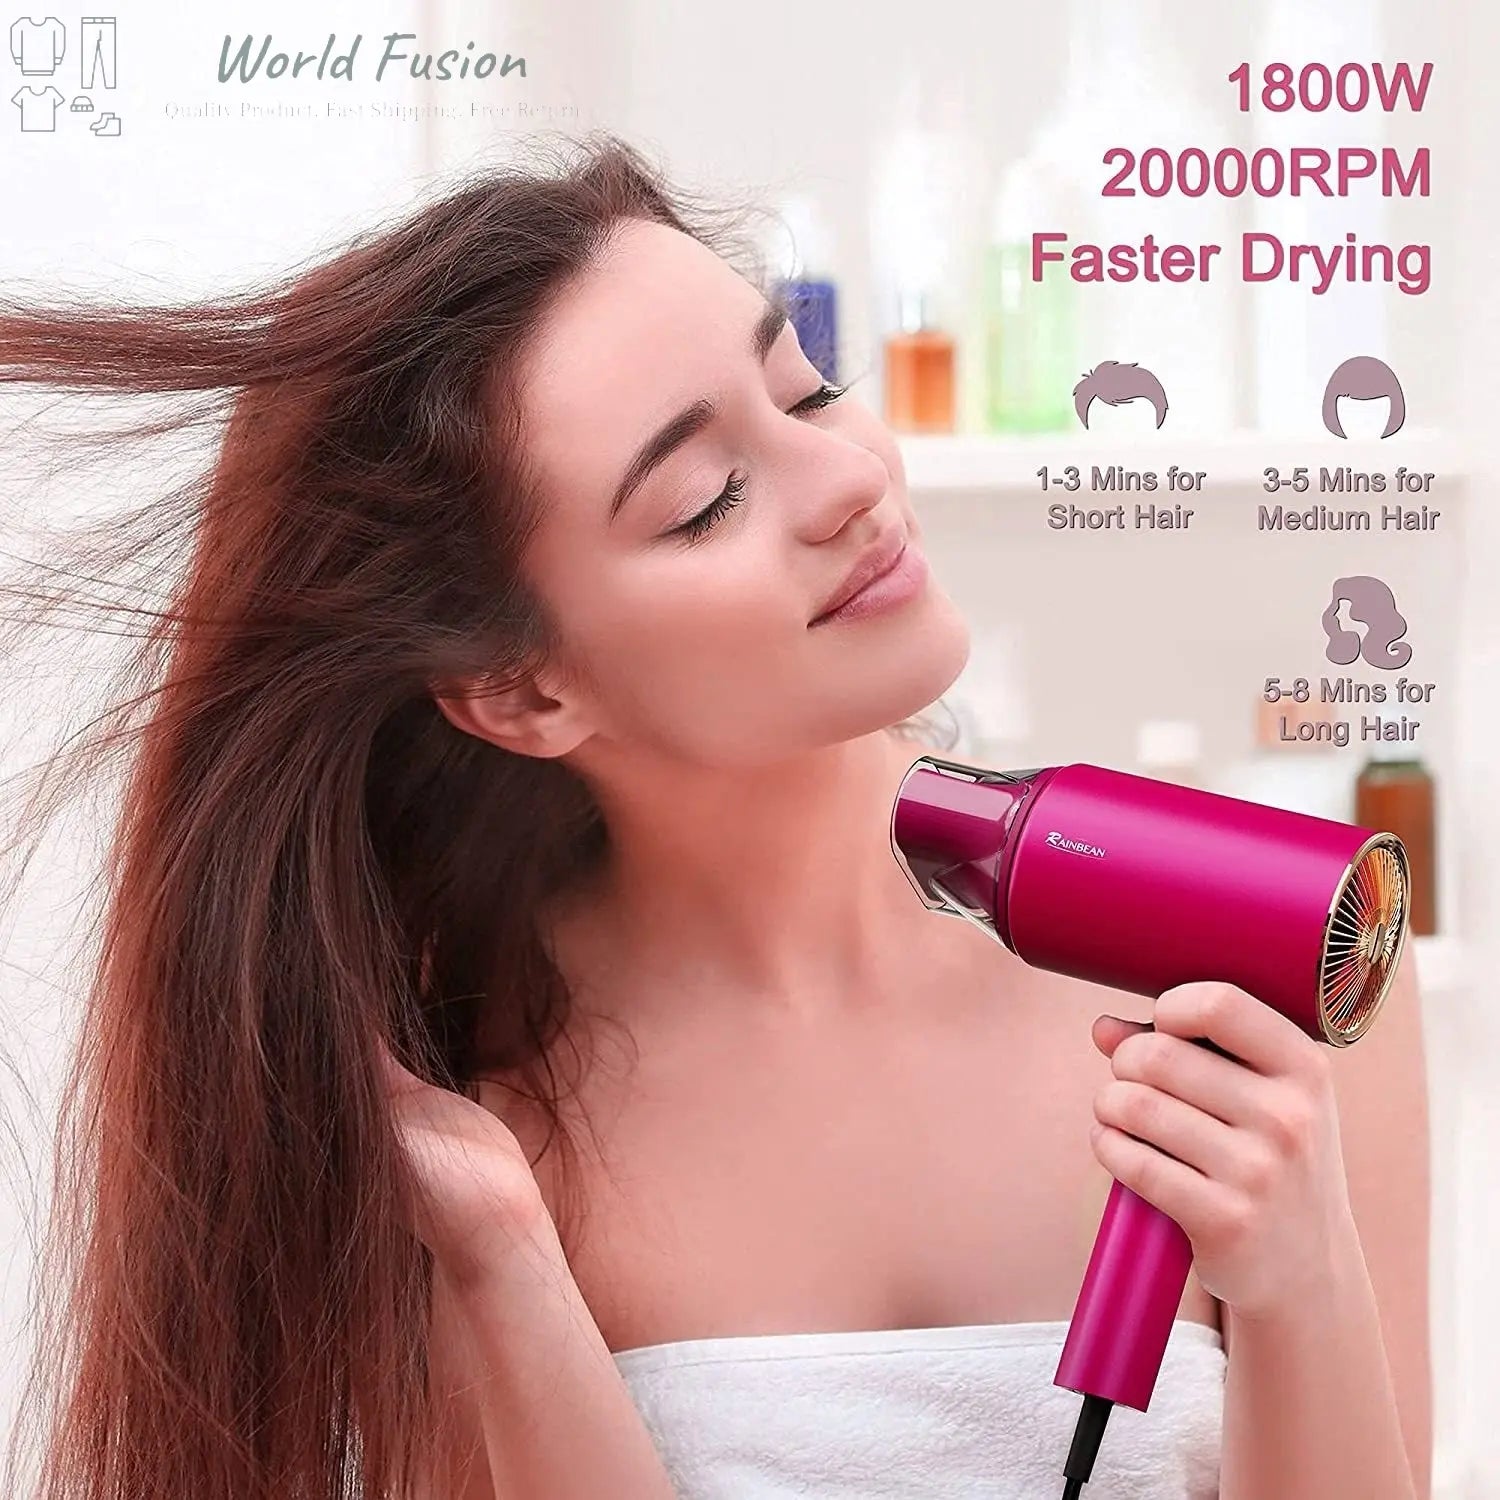 Water Ionic Hair Dryer, 1800W Blow Dryer With Magnetic Nozzle 2 Speed And 3 Heat Settings Powerful Low Noise Fast Drying Travel Hair Dryer For Home Travel - World Fusion